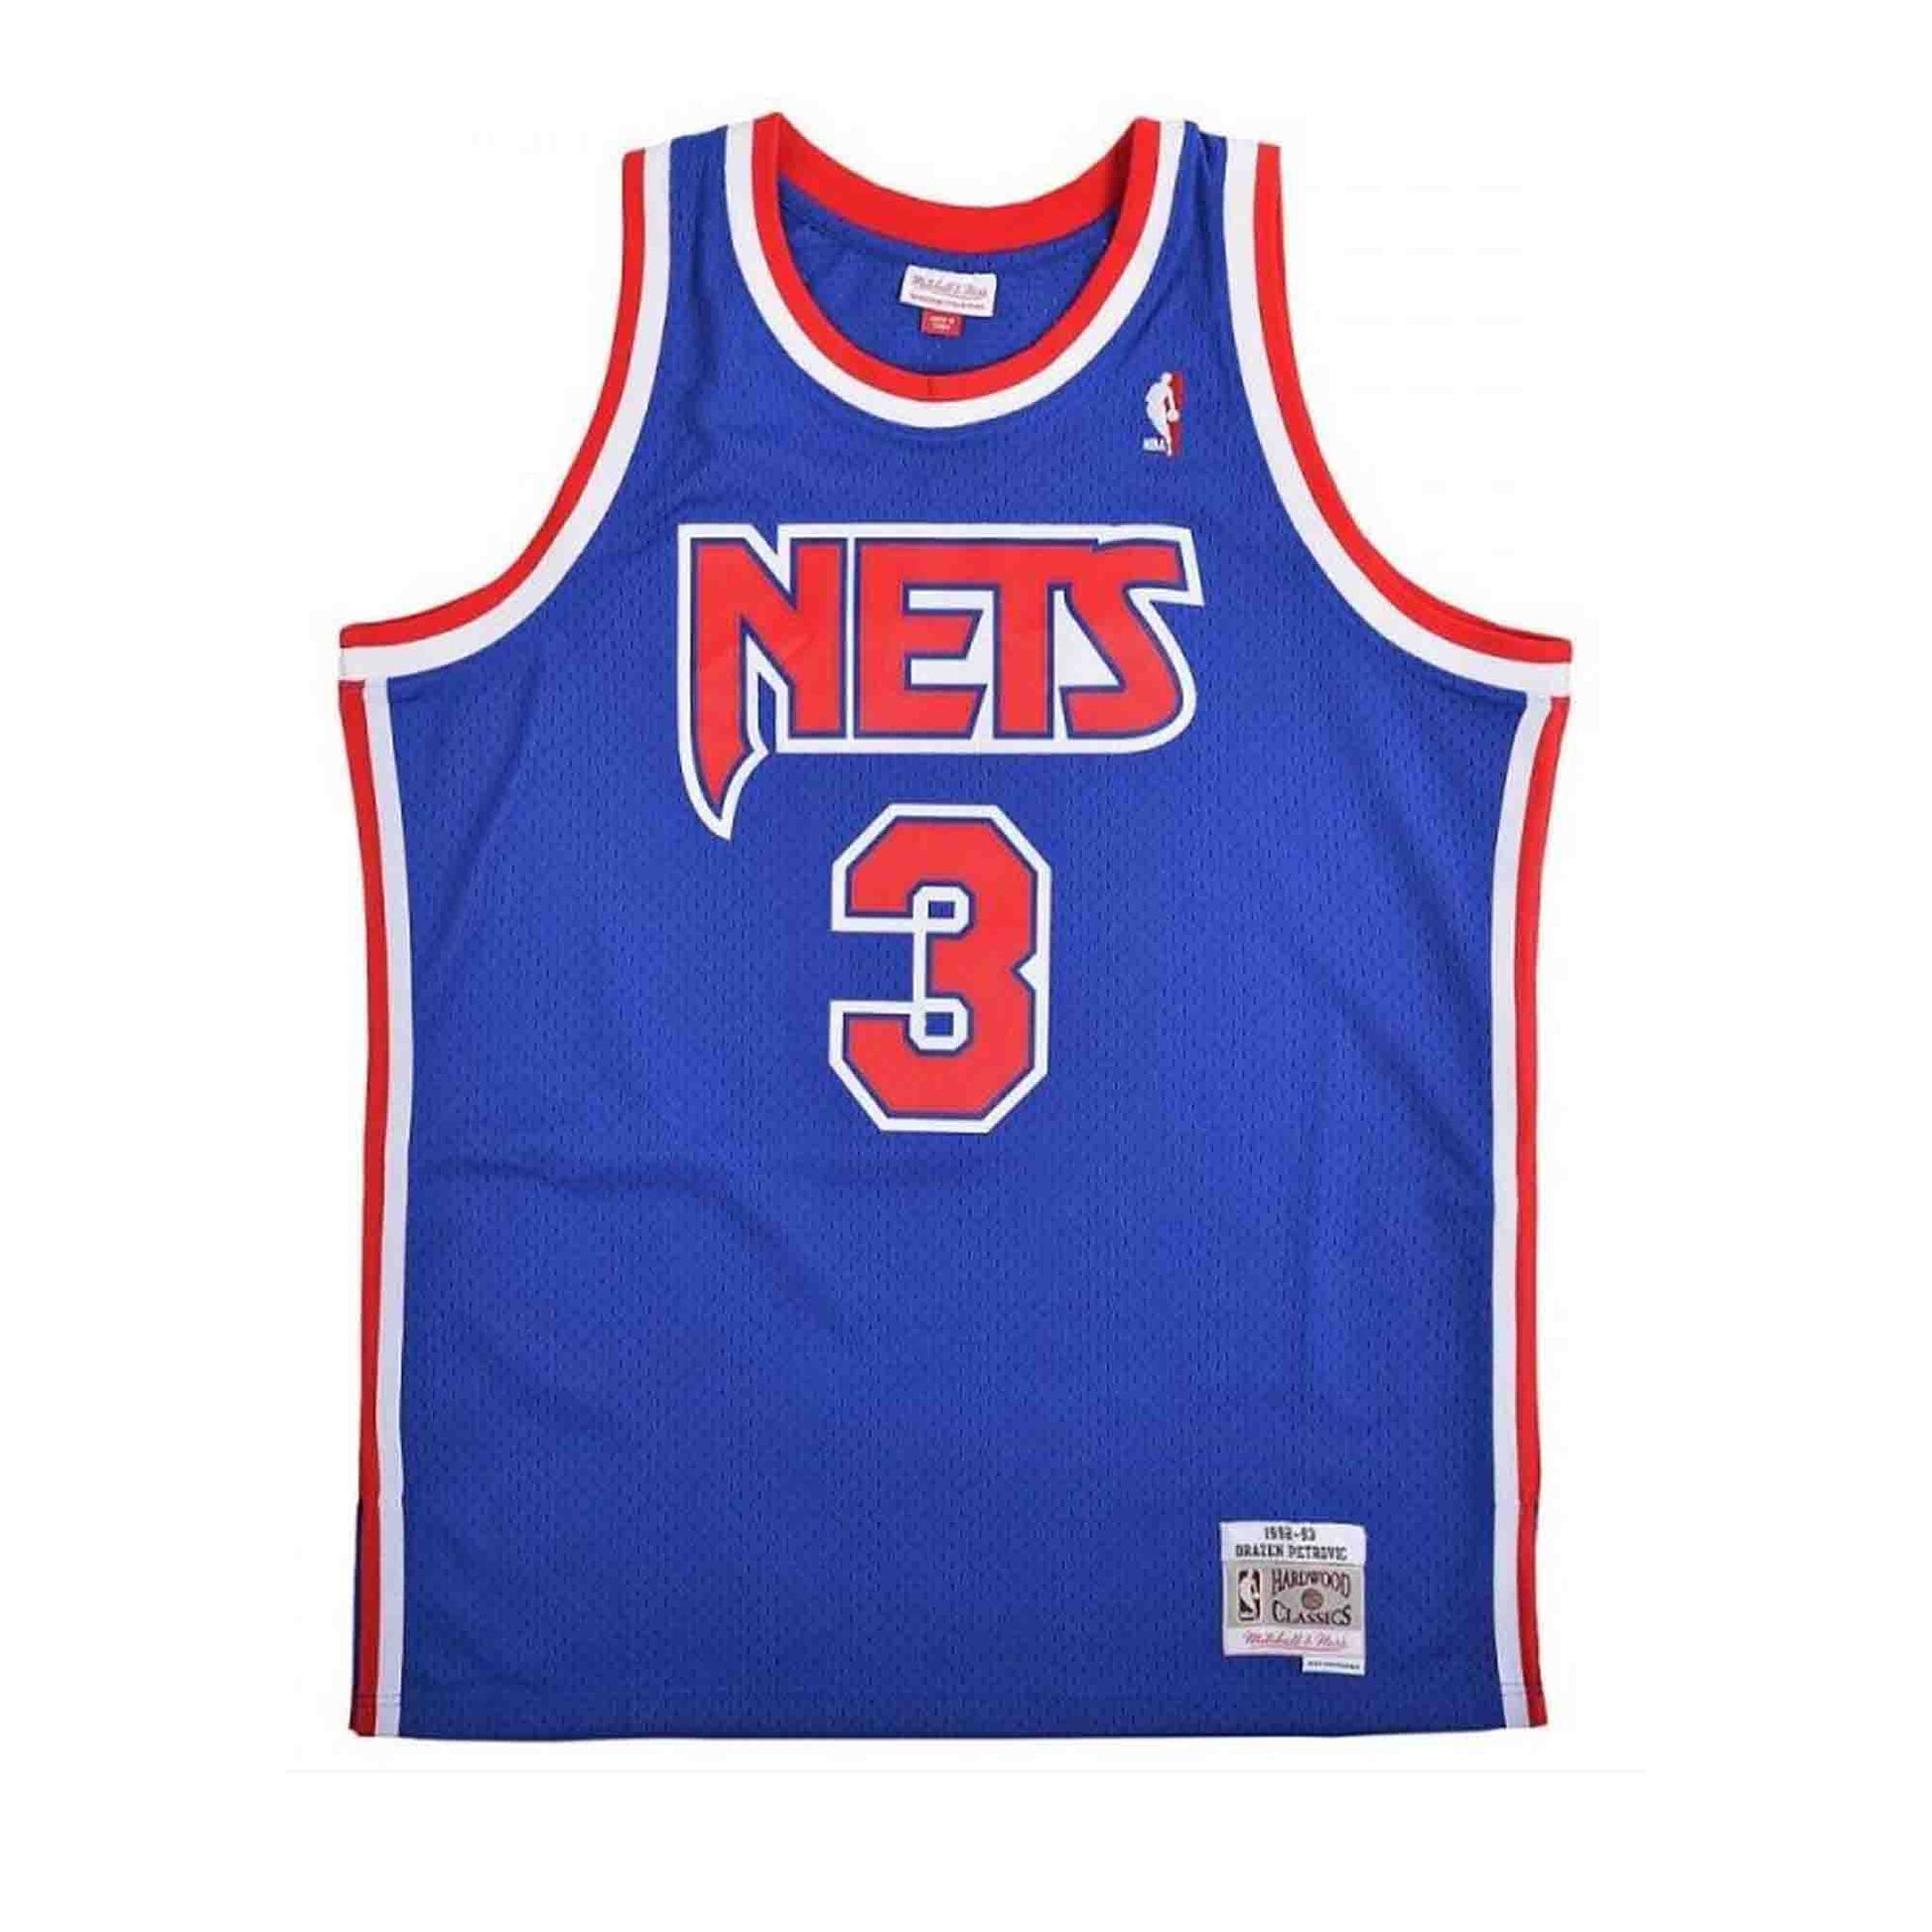 Today in history: Drazen Petrovic's jersey retired by New Jersey